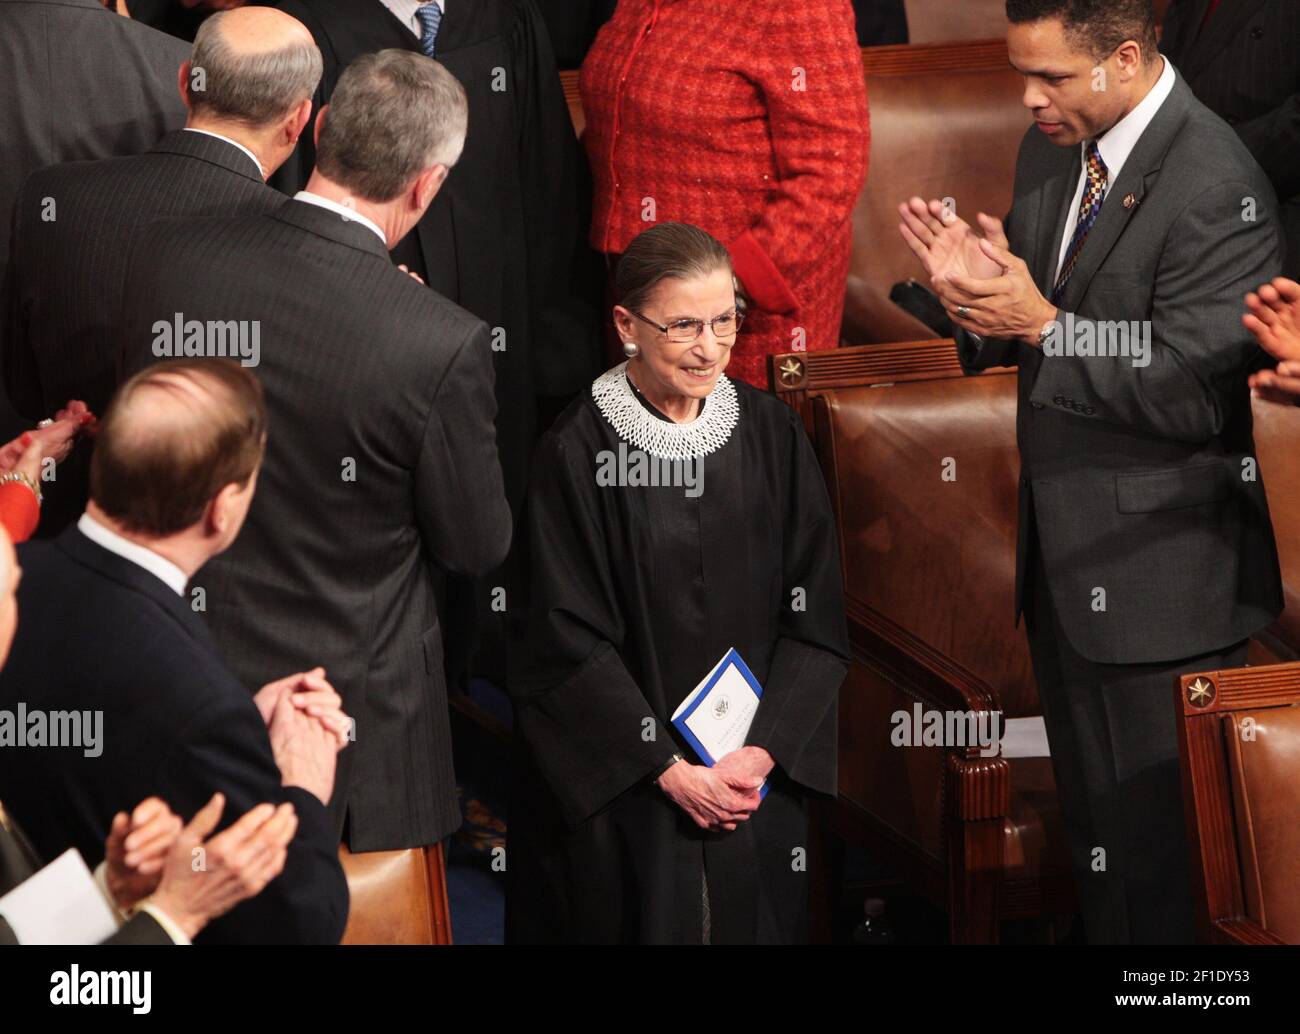 Associate Justice of the Supreme Court Ruth Bader Ginsburg is cheered as she arrives before President Barack Obama addresses a joint session of Congress on February 24, 2009, in the House of Representatives Chamber of the U.S. Capitol in Washington, D.C. (Photo by George Bridges/MCT/TNS/Sipa USA) Stock Photo